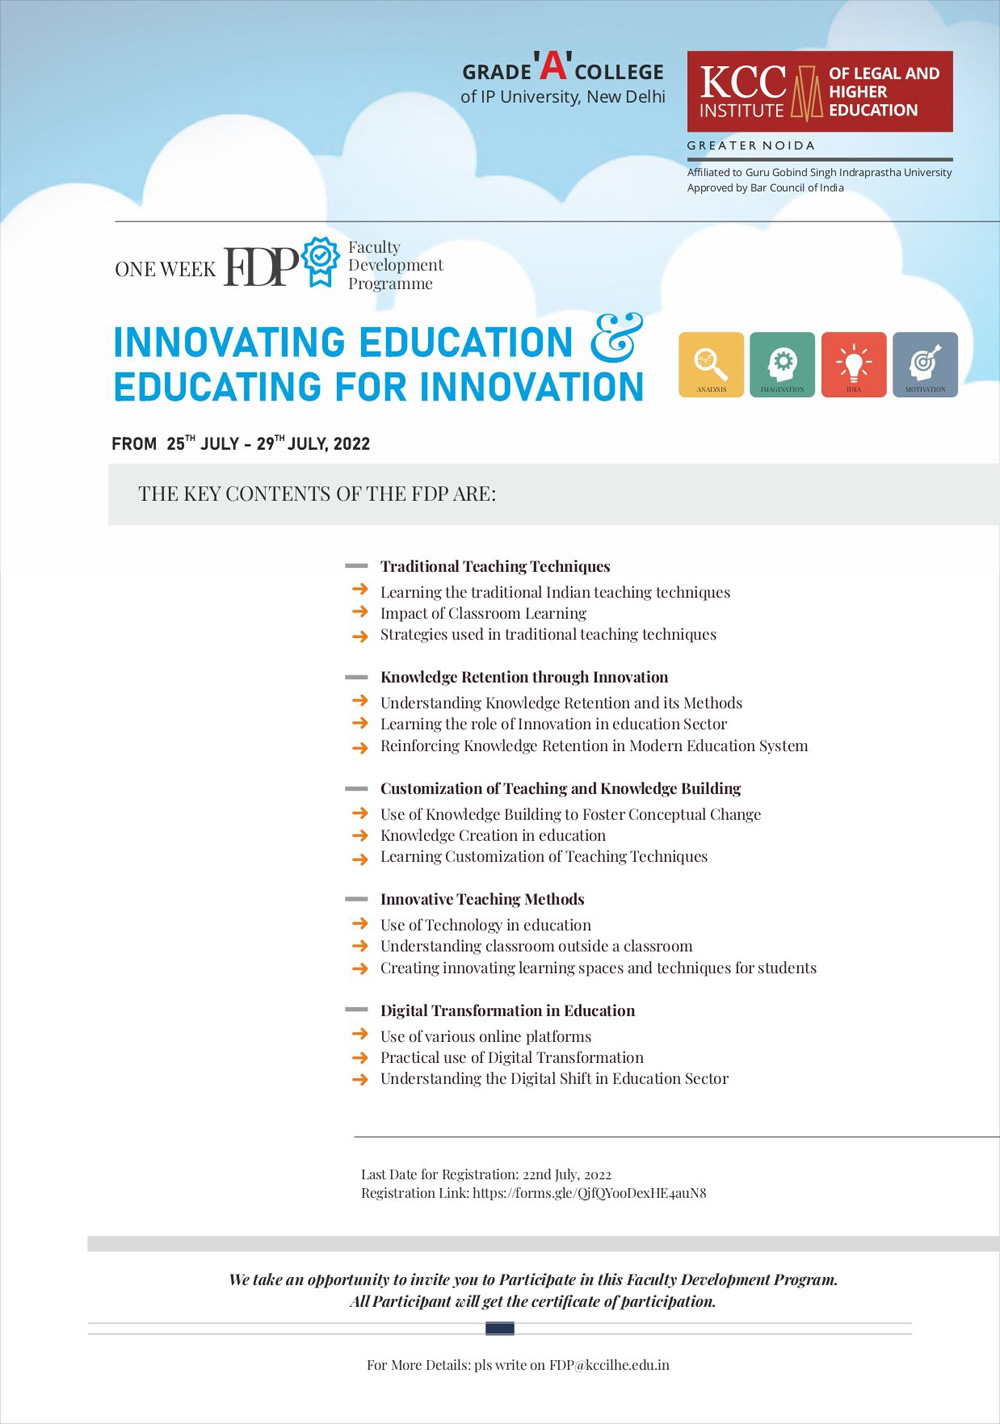 Faculty Development Programme on INNOVATING EDUCATION AND EDUCATING FOR INNOVATION